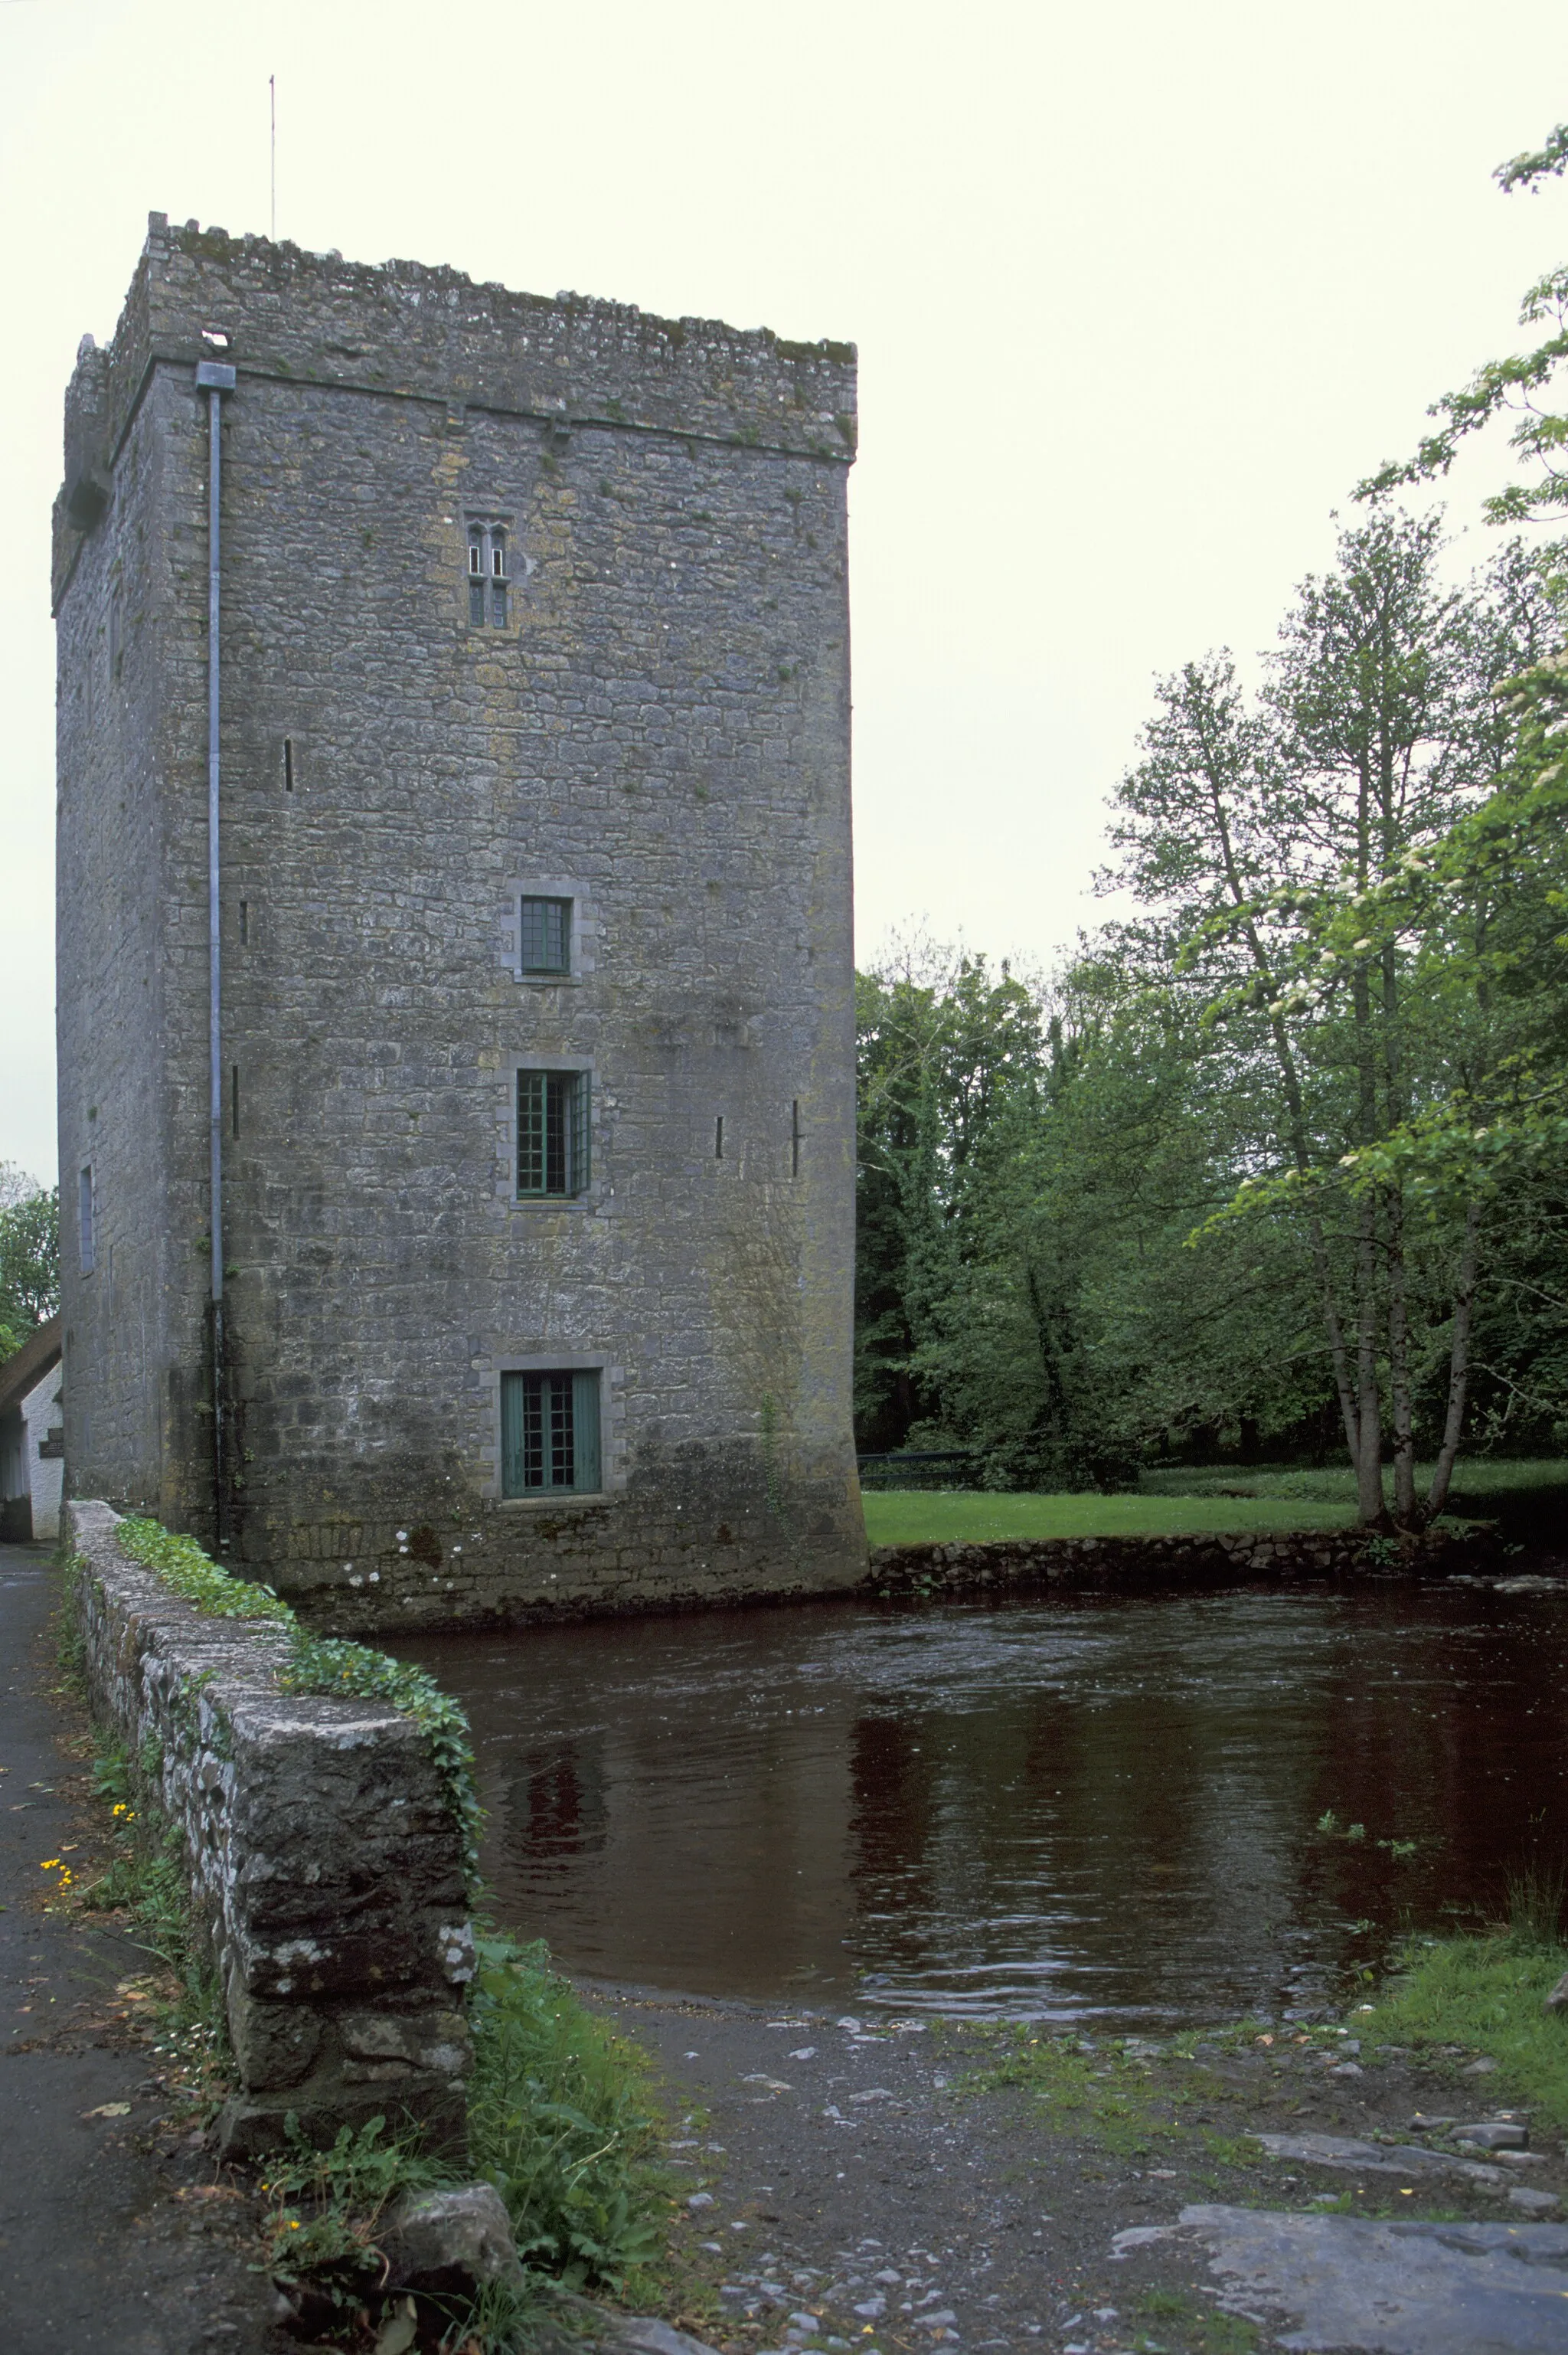 Photo showing: Thoor Ballylee / Túr Bhaile Uí Laí This 16th-century tower house of the De Burgo (Burke) family was restored by William Butler Yeats as a retreat for himself and his young family, who occupied it for ten years from 1919. After 1929 it fell into disrepair again, until reopened as a Yeats memorial and heritage centre from 1965.